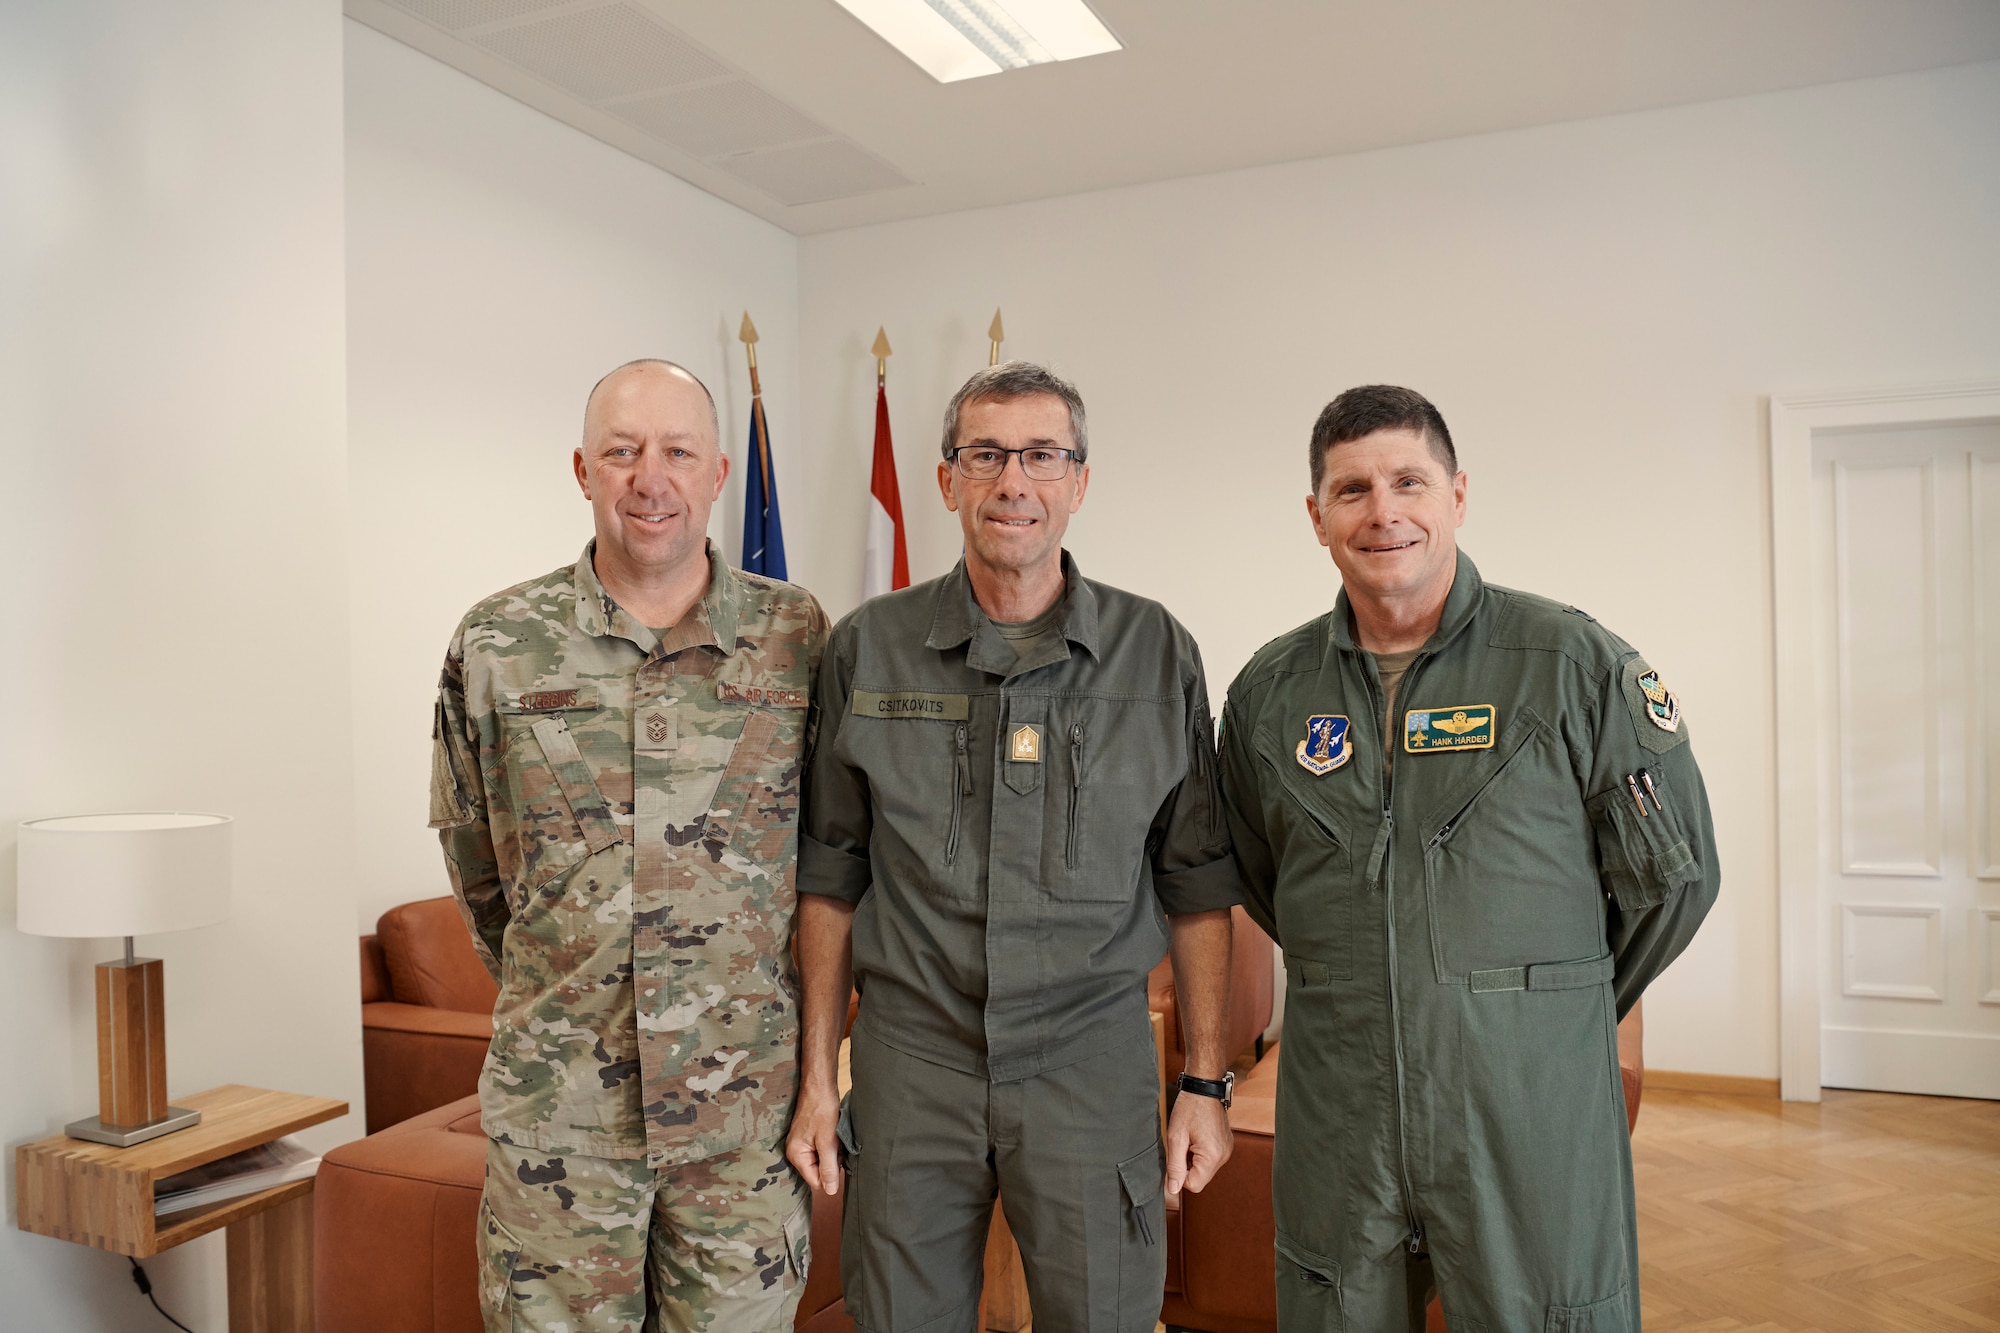 Photo of Vermont Air National Guard State Command Chief Master Sgt. Jeffrey Stebbins, Commandant of the Austrian Defense Academy Lt. Gen. Erich Csitkovits and Air Component Commander of the Vermont National Guard, Brig. Gen. Henry Harder, meeting at the Austrian Defense Academy to discuss cooperation between the Austrian Armed Forces and the Vermont National Guard, Vienna, Austria, June 15, 2023.